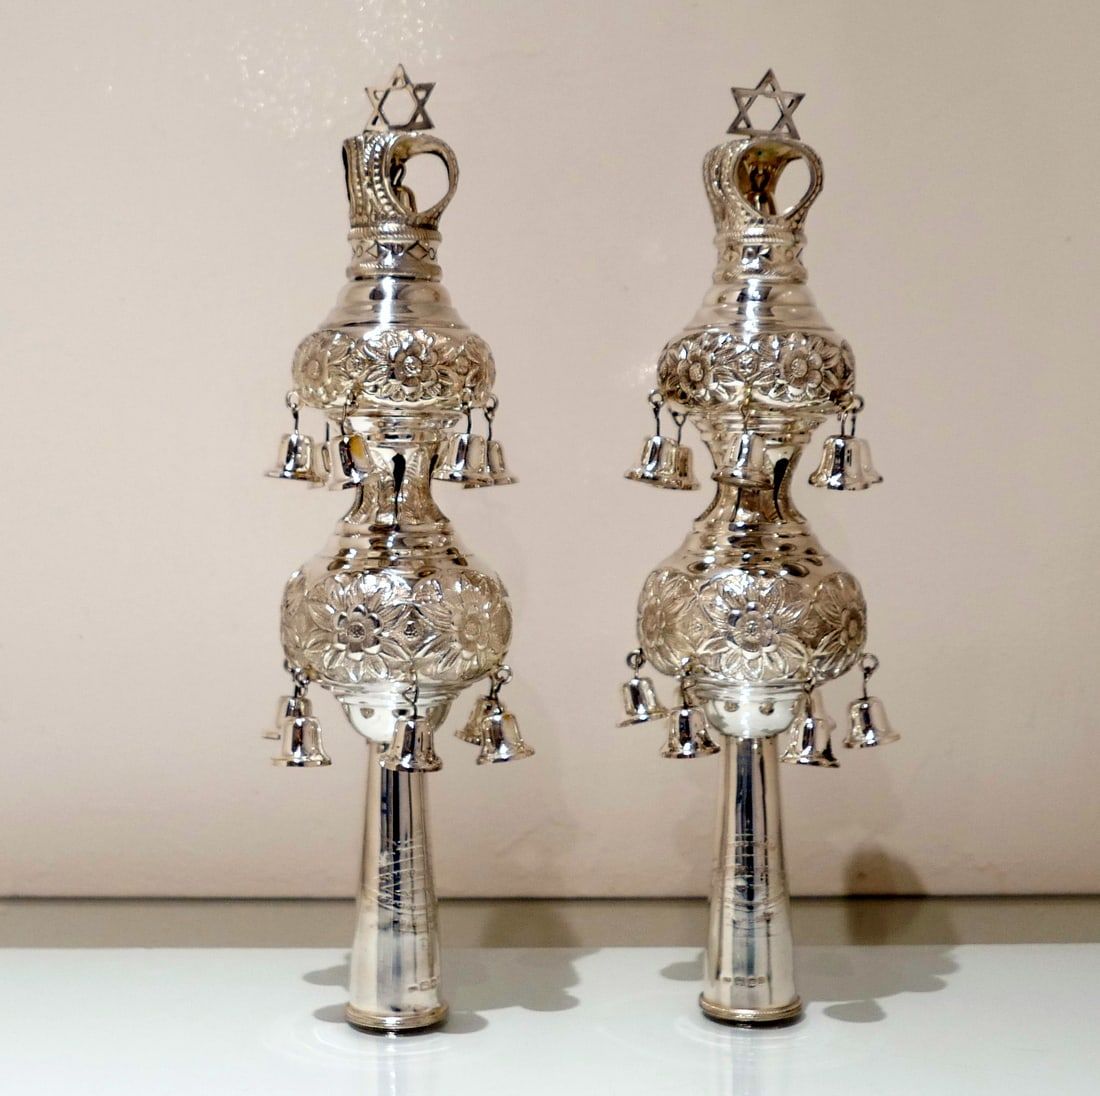 Pair of early 20th-century silver rimonim, or torah finials, by Simon Zimmerman, estimated at $4,000-$5,000 at Jasper52.